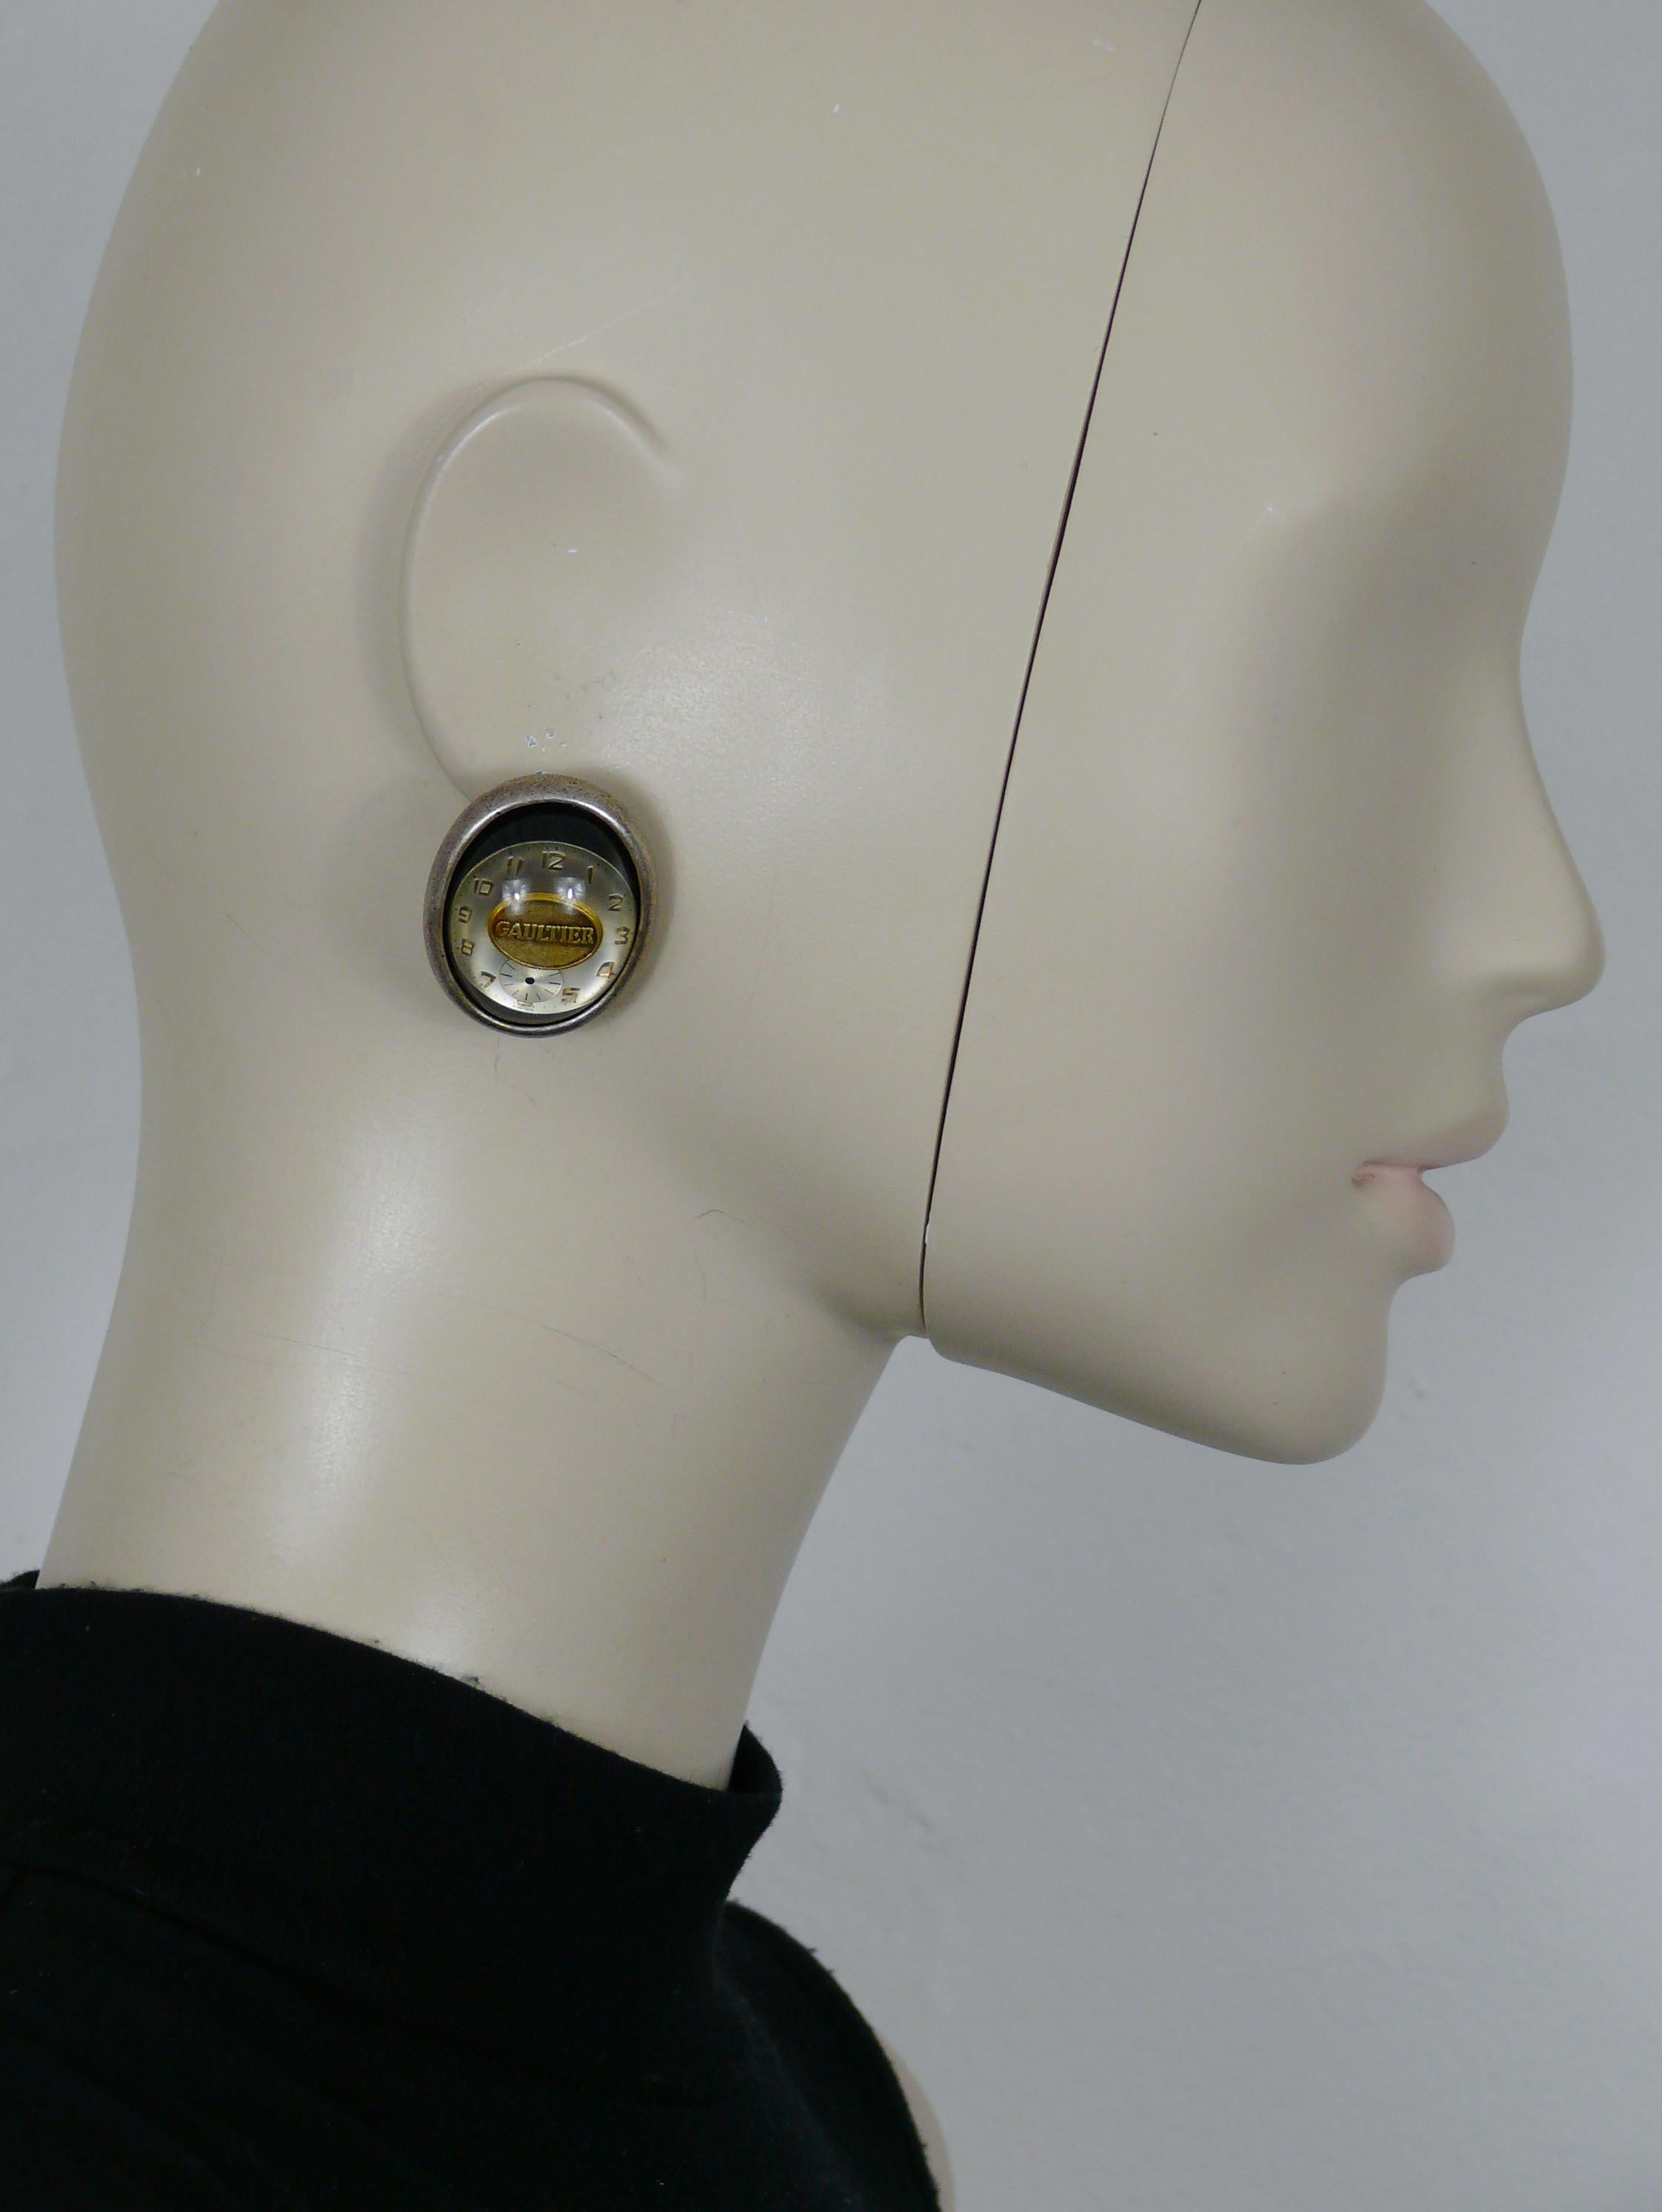 JEAN PAUL GAULTIER vintage steampunk clip-on earrings featuring a clock dial resin inlaid in a distressed silver tone setting.

Marked GAULTIER.

Indicative measurements : height approx. 3.2 cm (1.26 inches) / max. width approx 2.6 cm (1.02